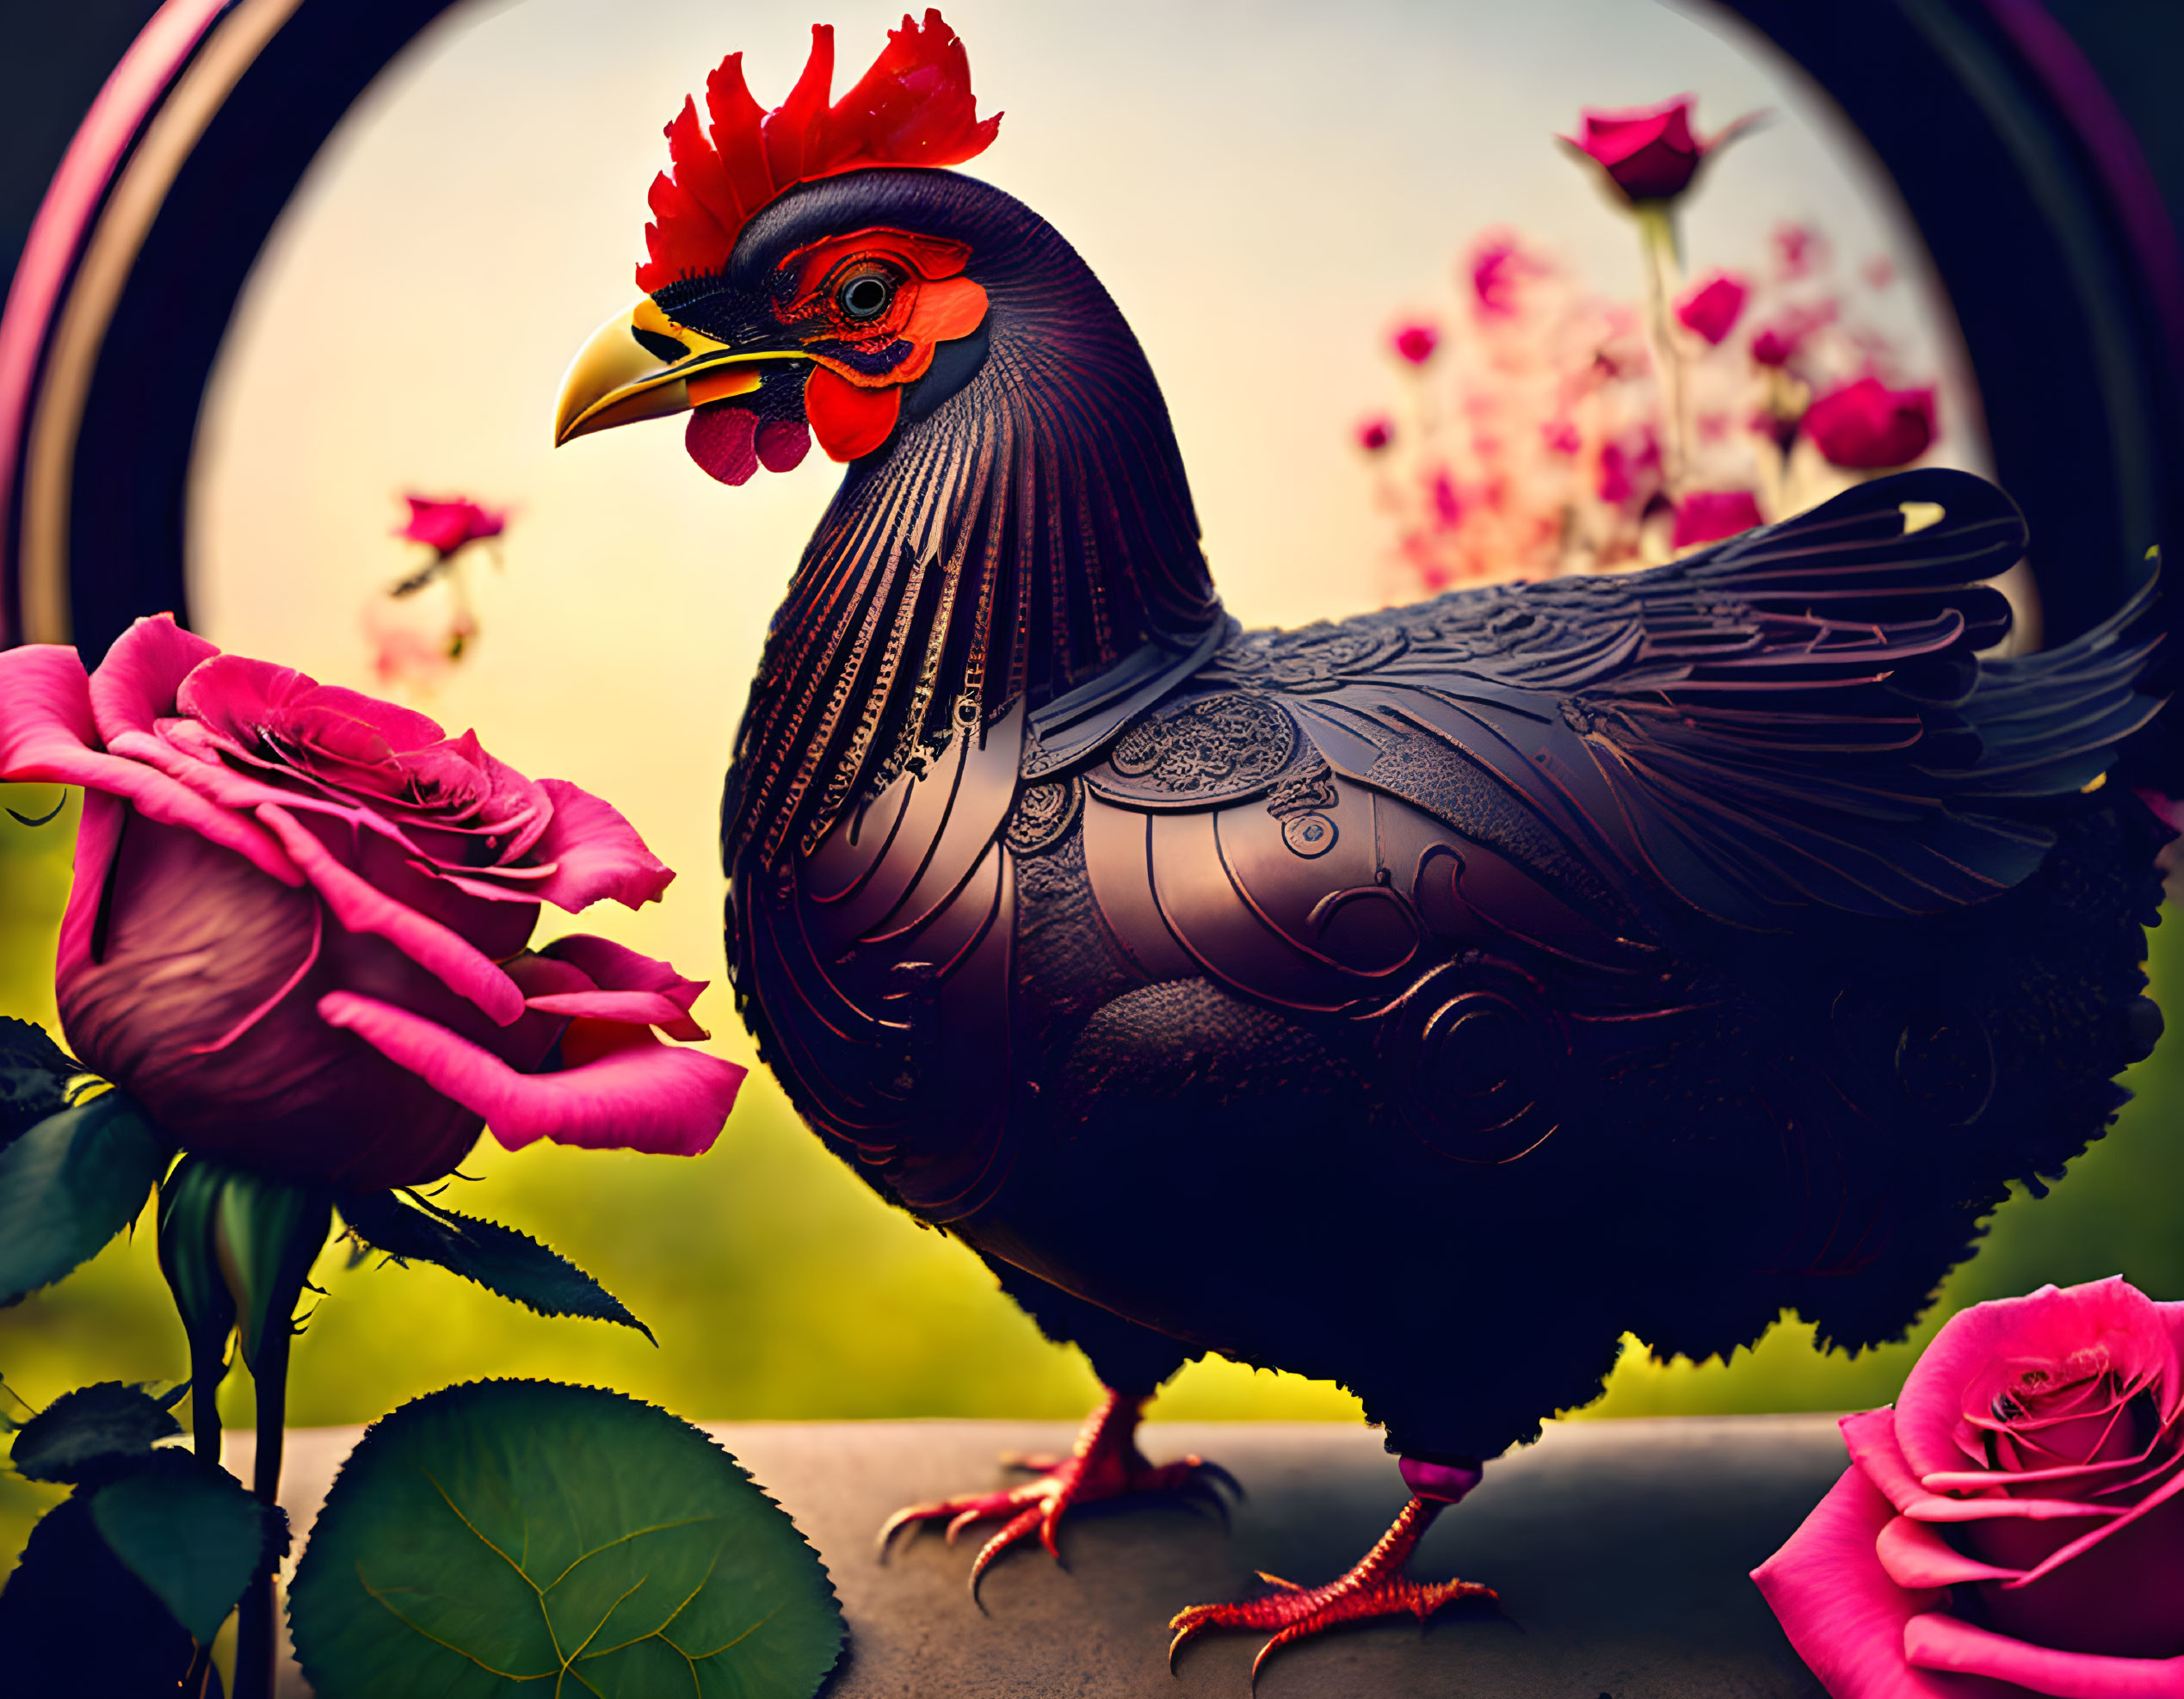 Ornate black rooster with red comb among pink roses in digital artwork